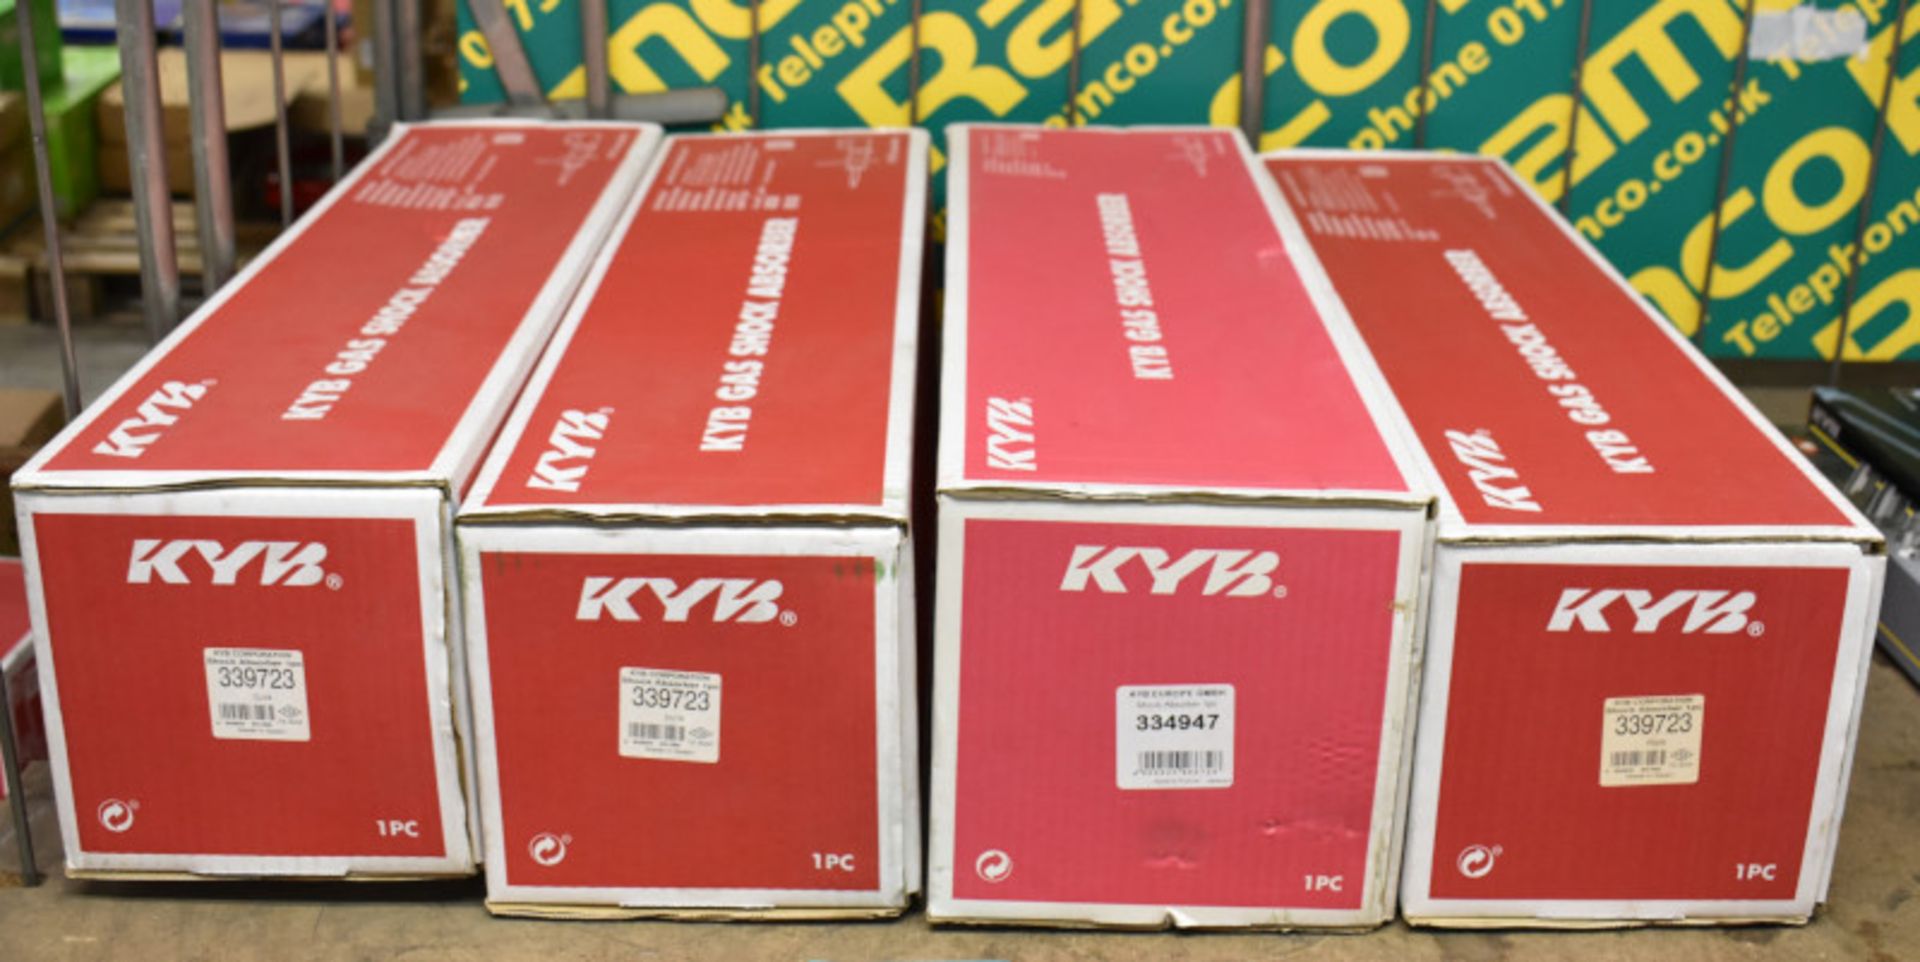 4x KYB Gas Shock Absorbers - please see pictures for examples of make and model numbers